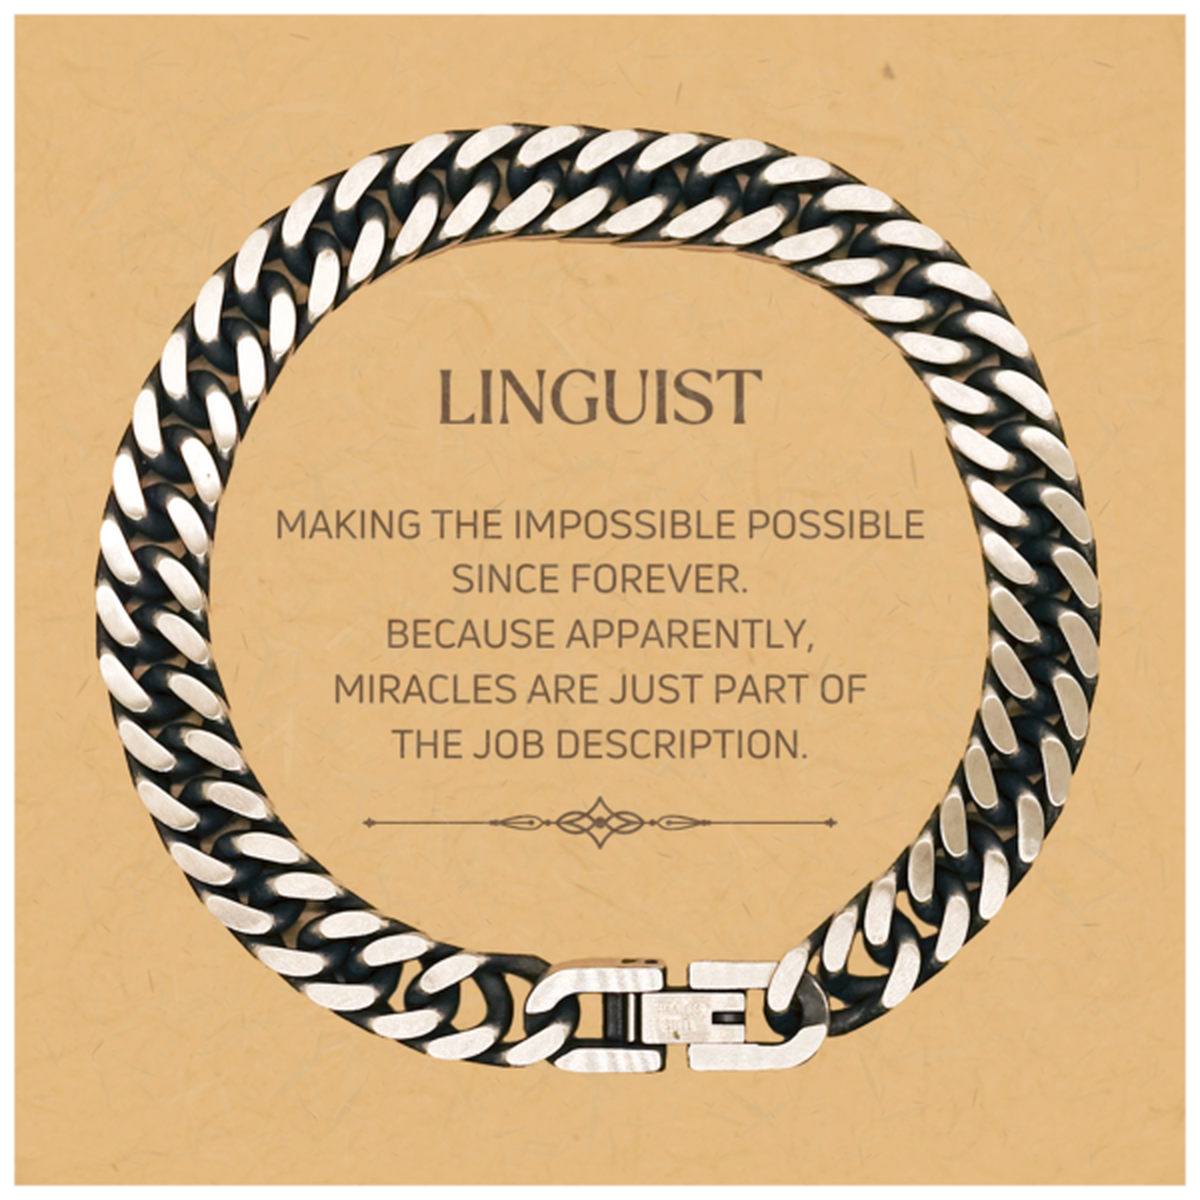 Funny Linguist Gifts, Miracles are just part of the job description, Inspirational Birthday Christmas Cuban Link Chain Bracelet For Linguist, Men, Women, Coworkers, Friends, Boss